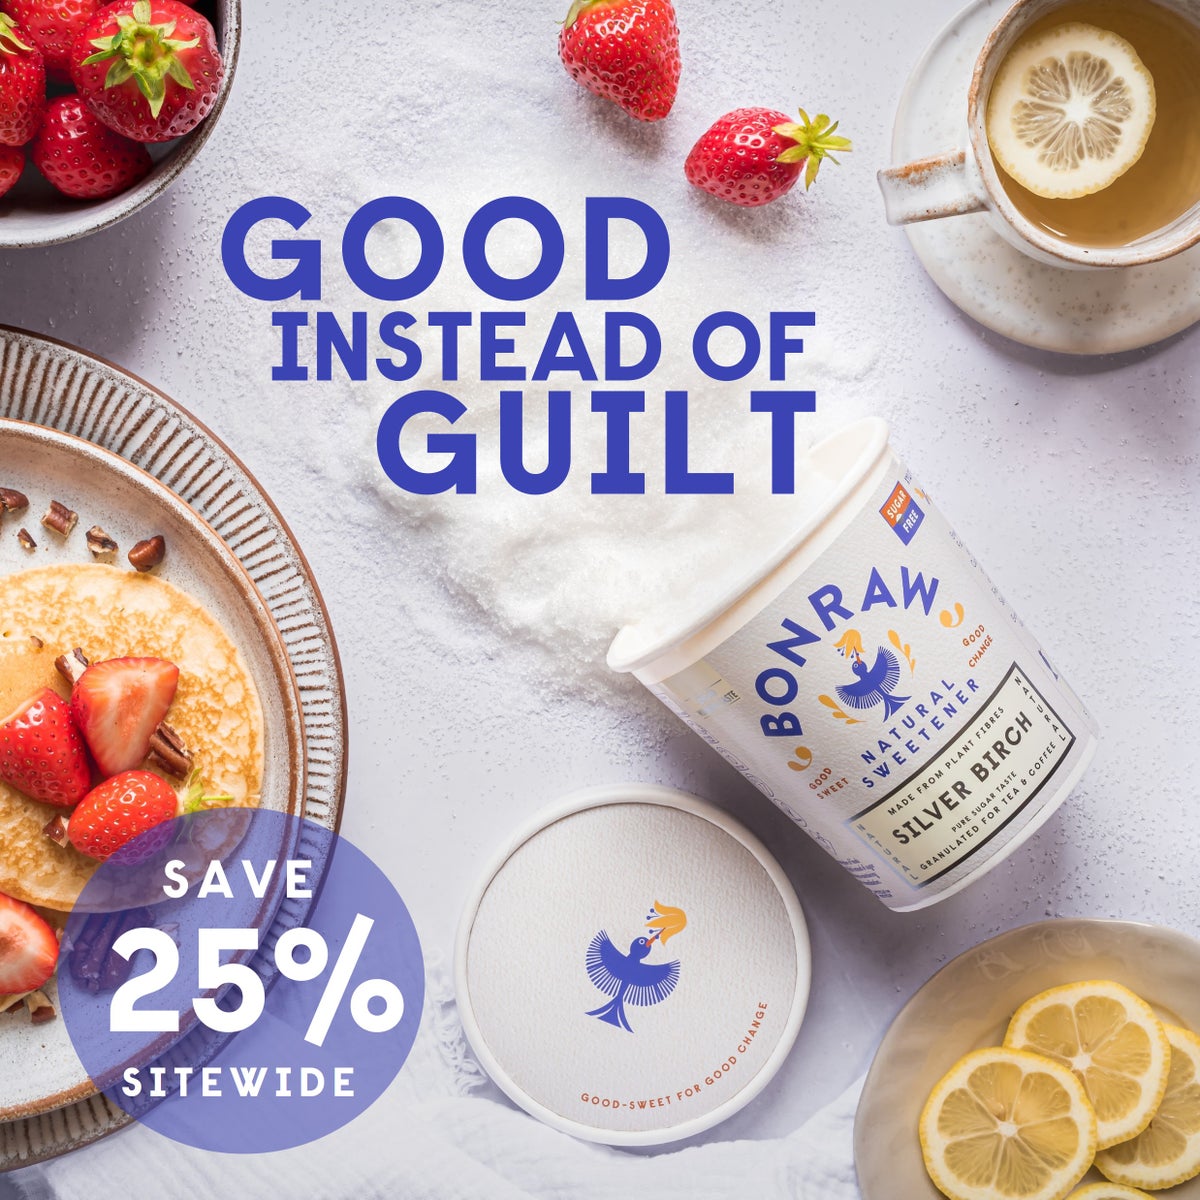 Good instead of guilt. 25% off everything!